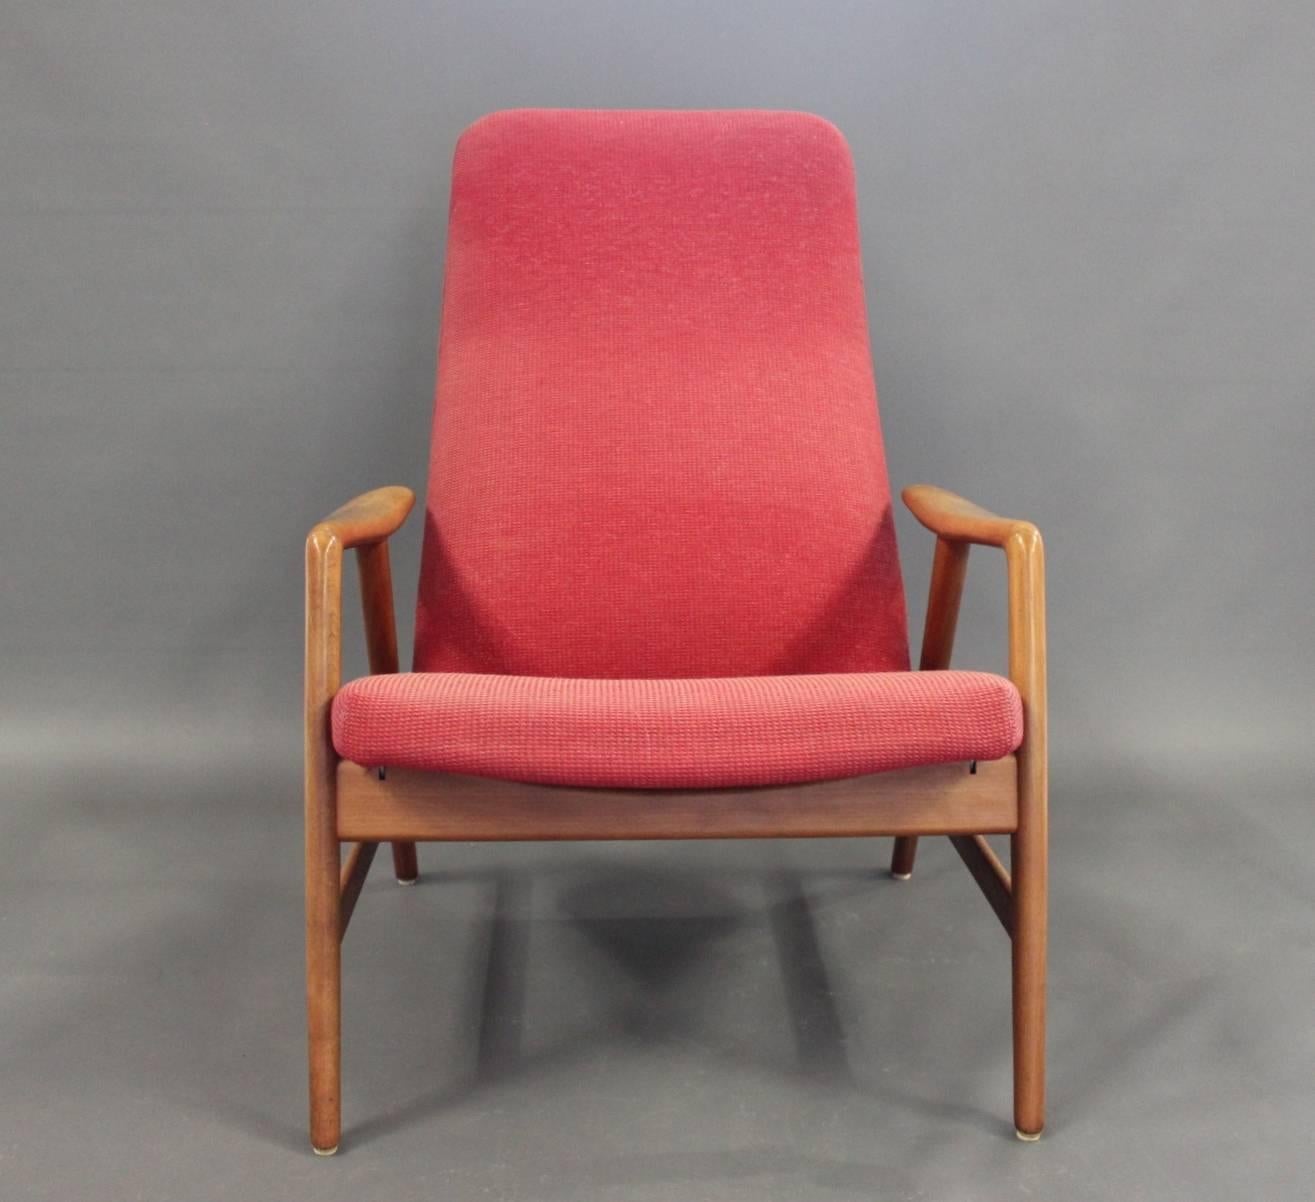 Easy chair designed by Alf Svensson and manufactured by Fritz Hansen in the 1960s. The chair is of elm and upholstered with red fabric.